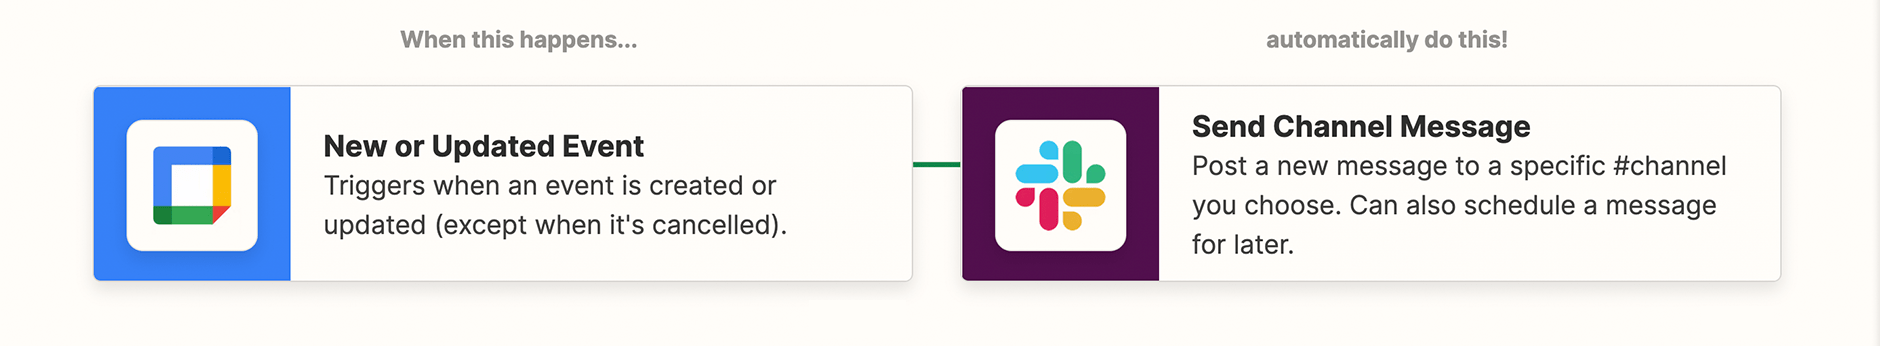 A visual representation of a simple automation or Zap in Zapier. One box shows the trigger - a new event or update to an event in Google calendar. The box to the right is the action caused by the trigger; a customized message is sent to a Slack channel.